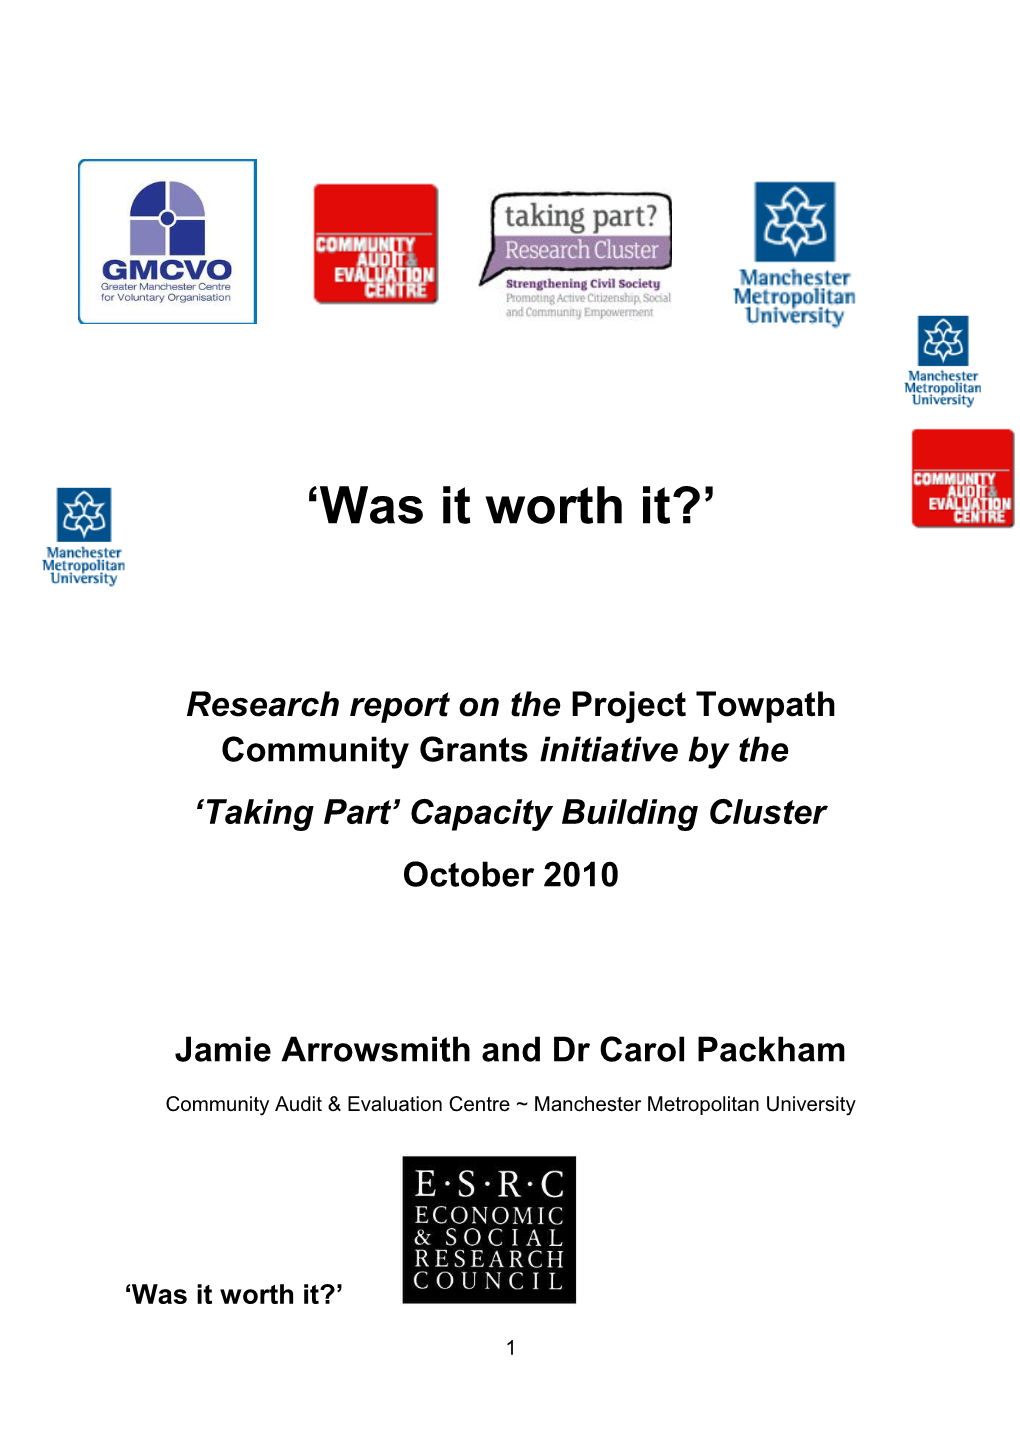 Research Report on the Project Towpath Community Grants Initiative by The